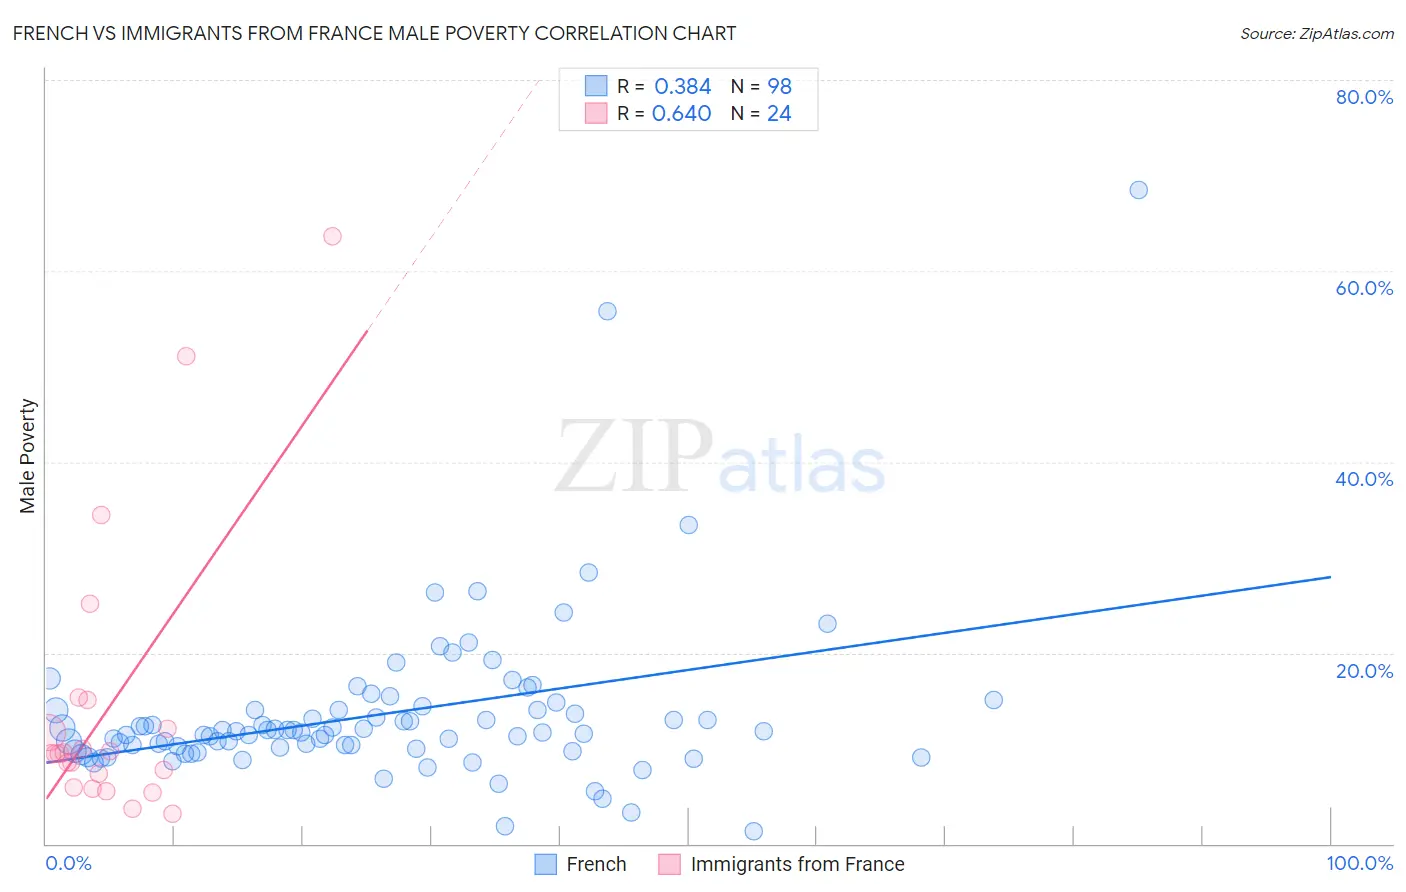 French vs Immigrants from France Male Poverty